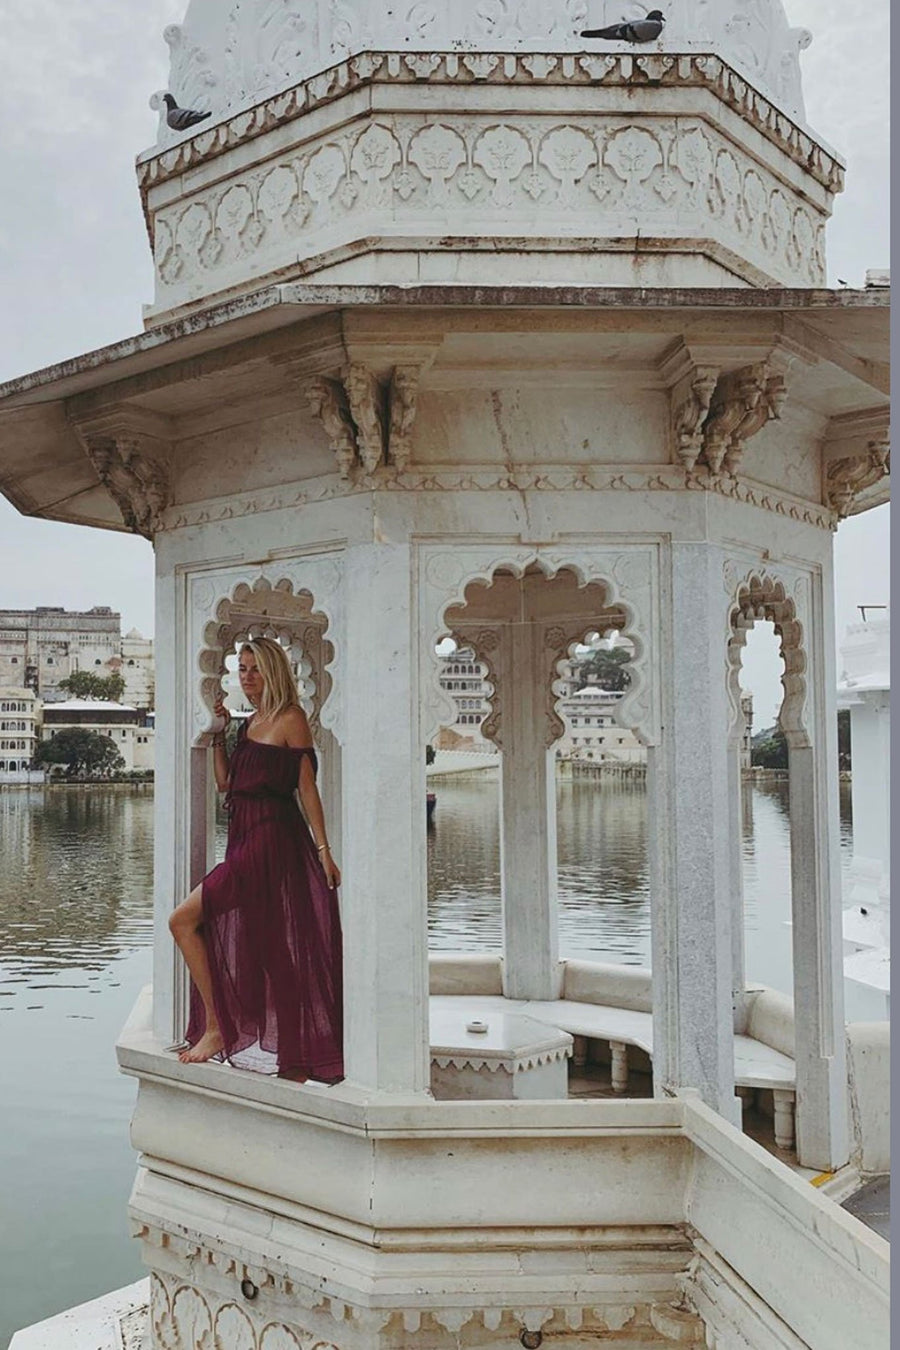 This is a photo of a woman wearing a magenta cotton gauze floor-length maxi coverup that falls off both shoulder and ties around center front chest area and waistline. Photo is taken on a white gazebo type structure overlooking a body of water and dress shows center front leg slit.